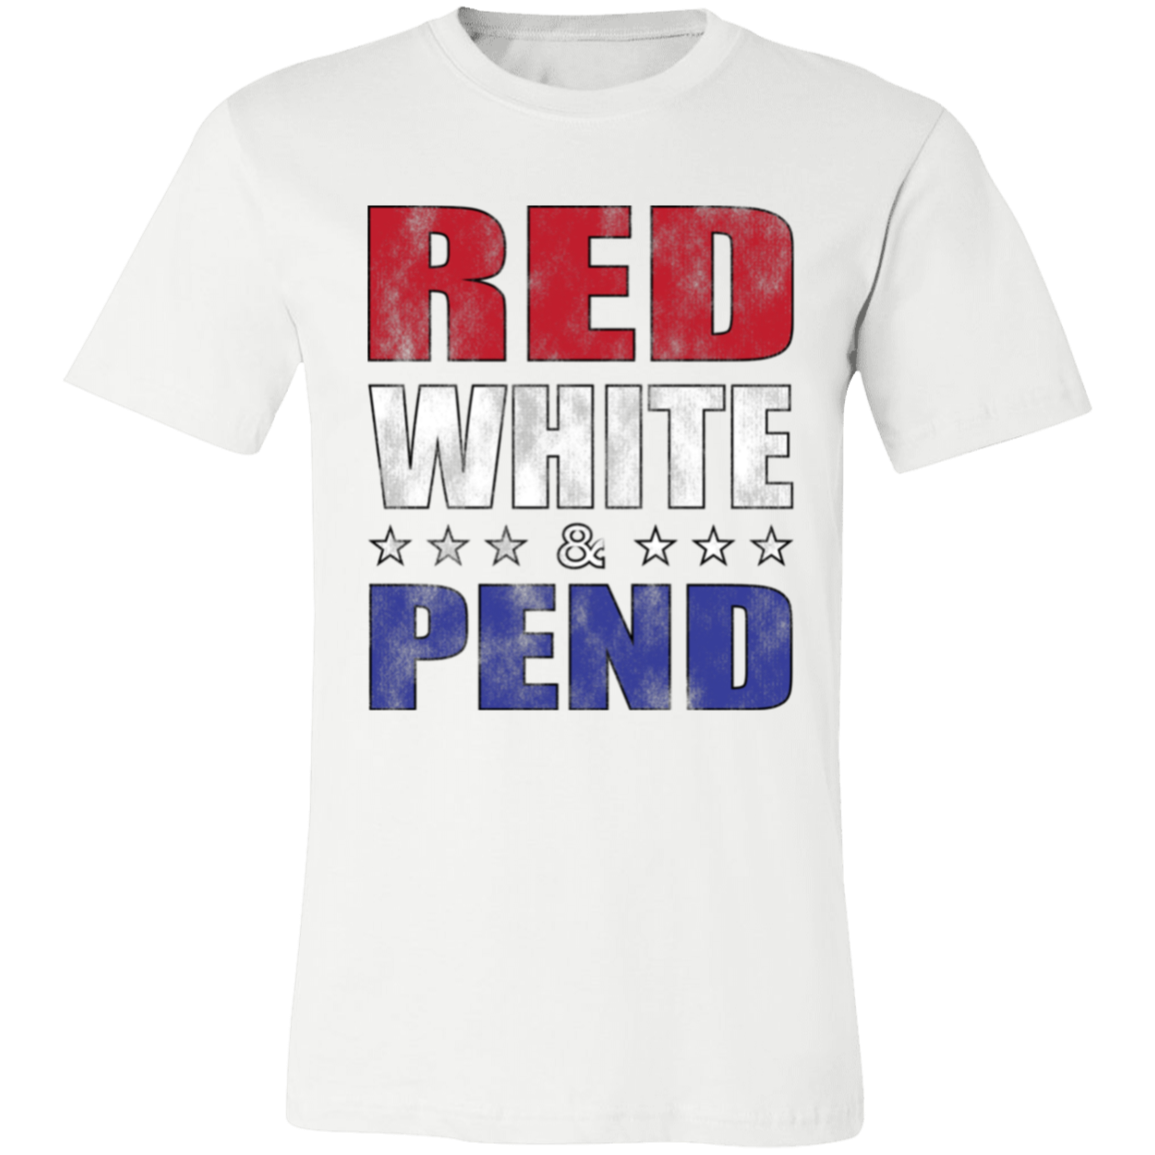 Red White & Pend Shirt